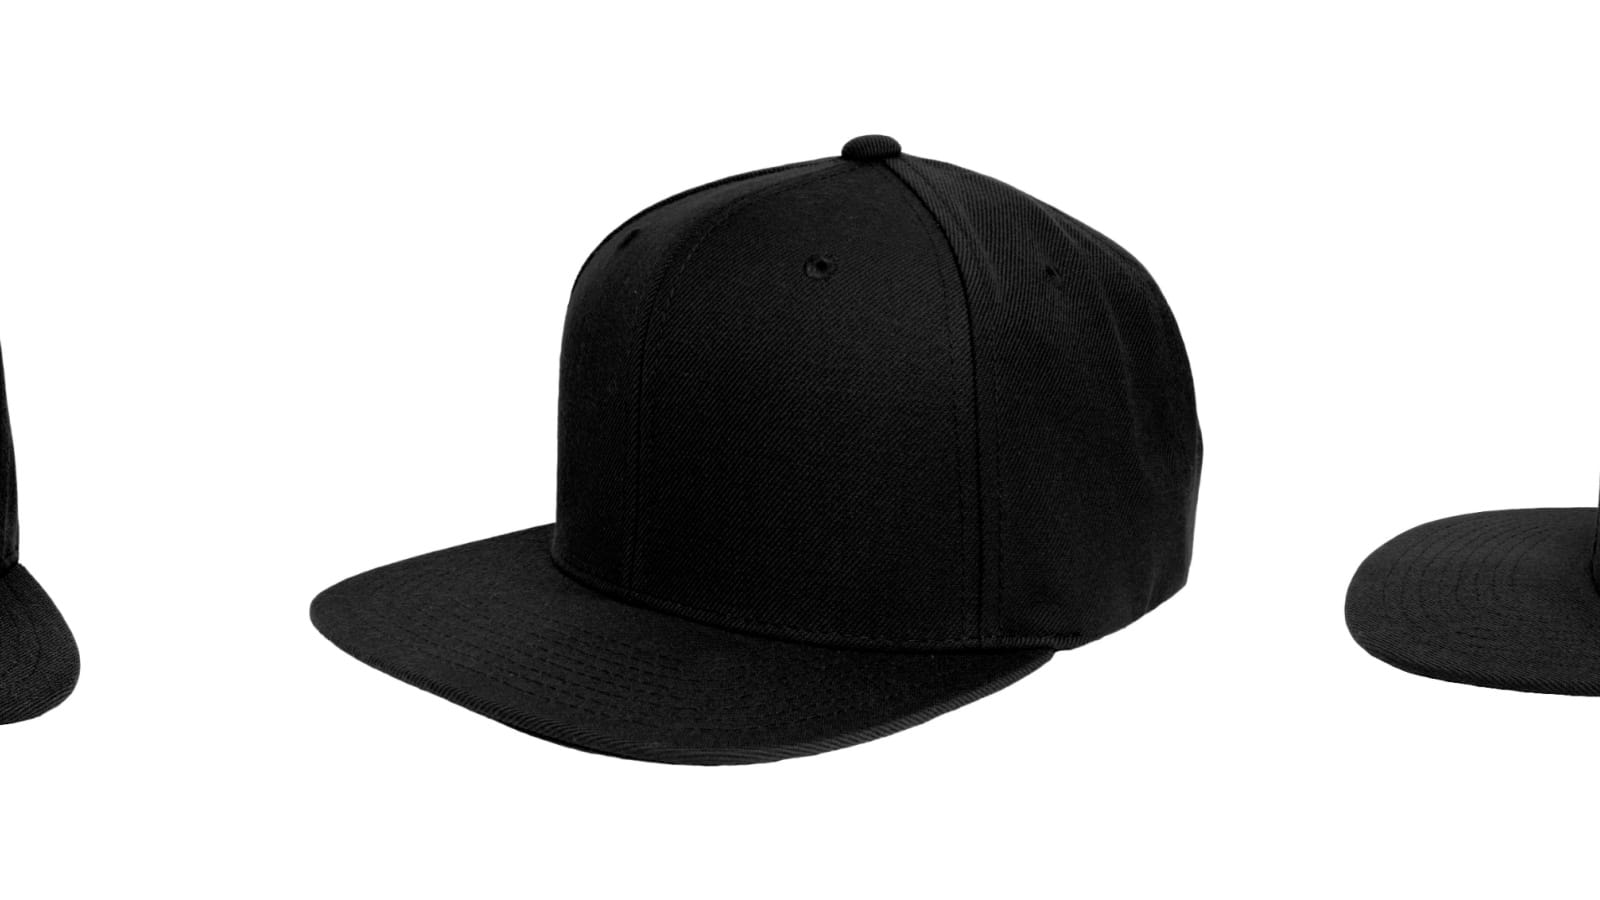 Three shots of a fitted black hat from different angles isolated on a white background.